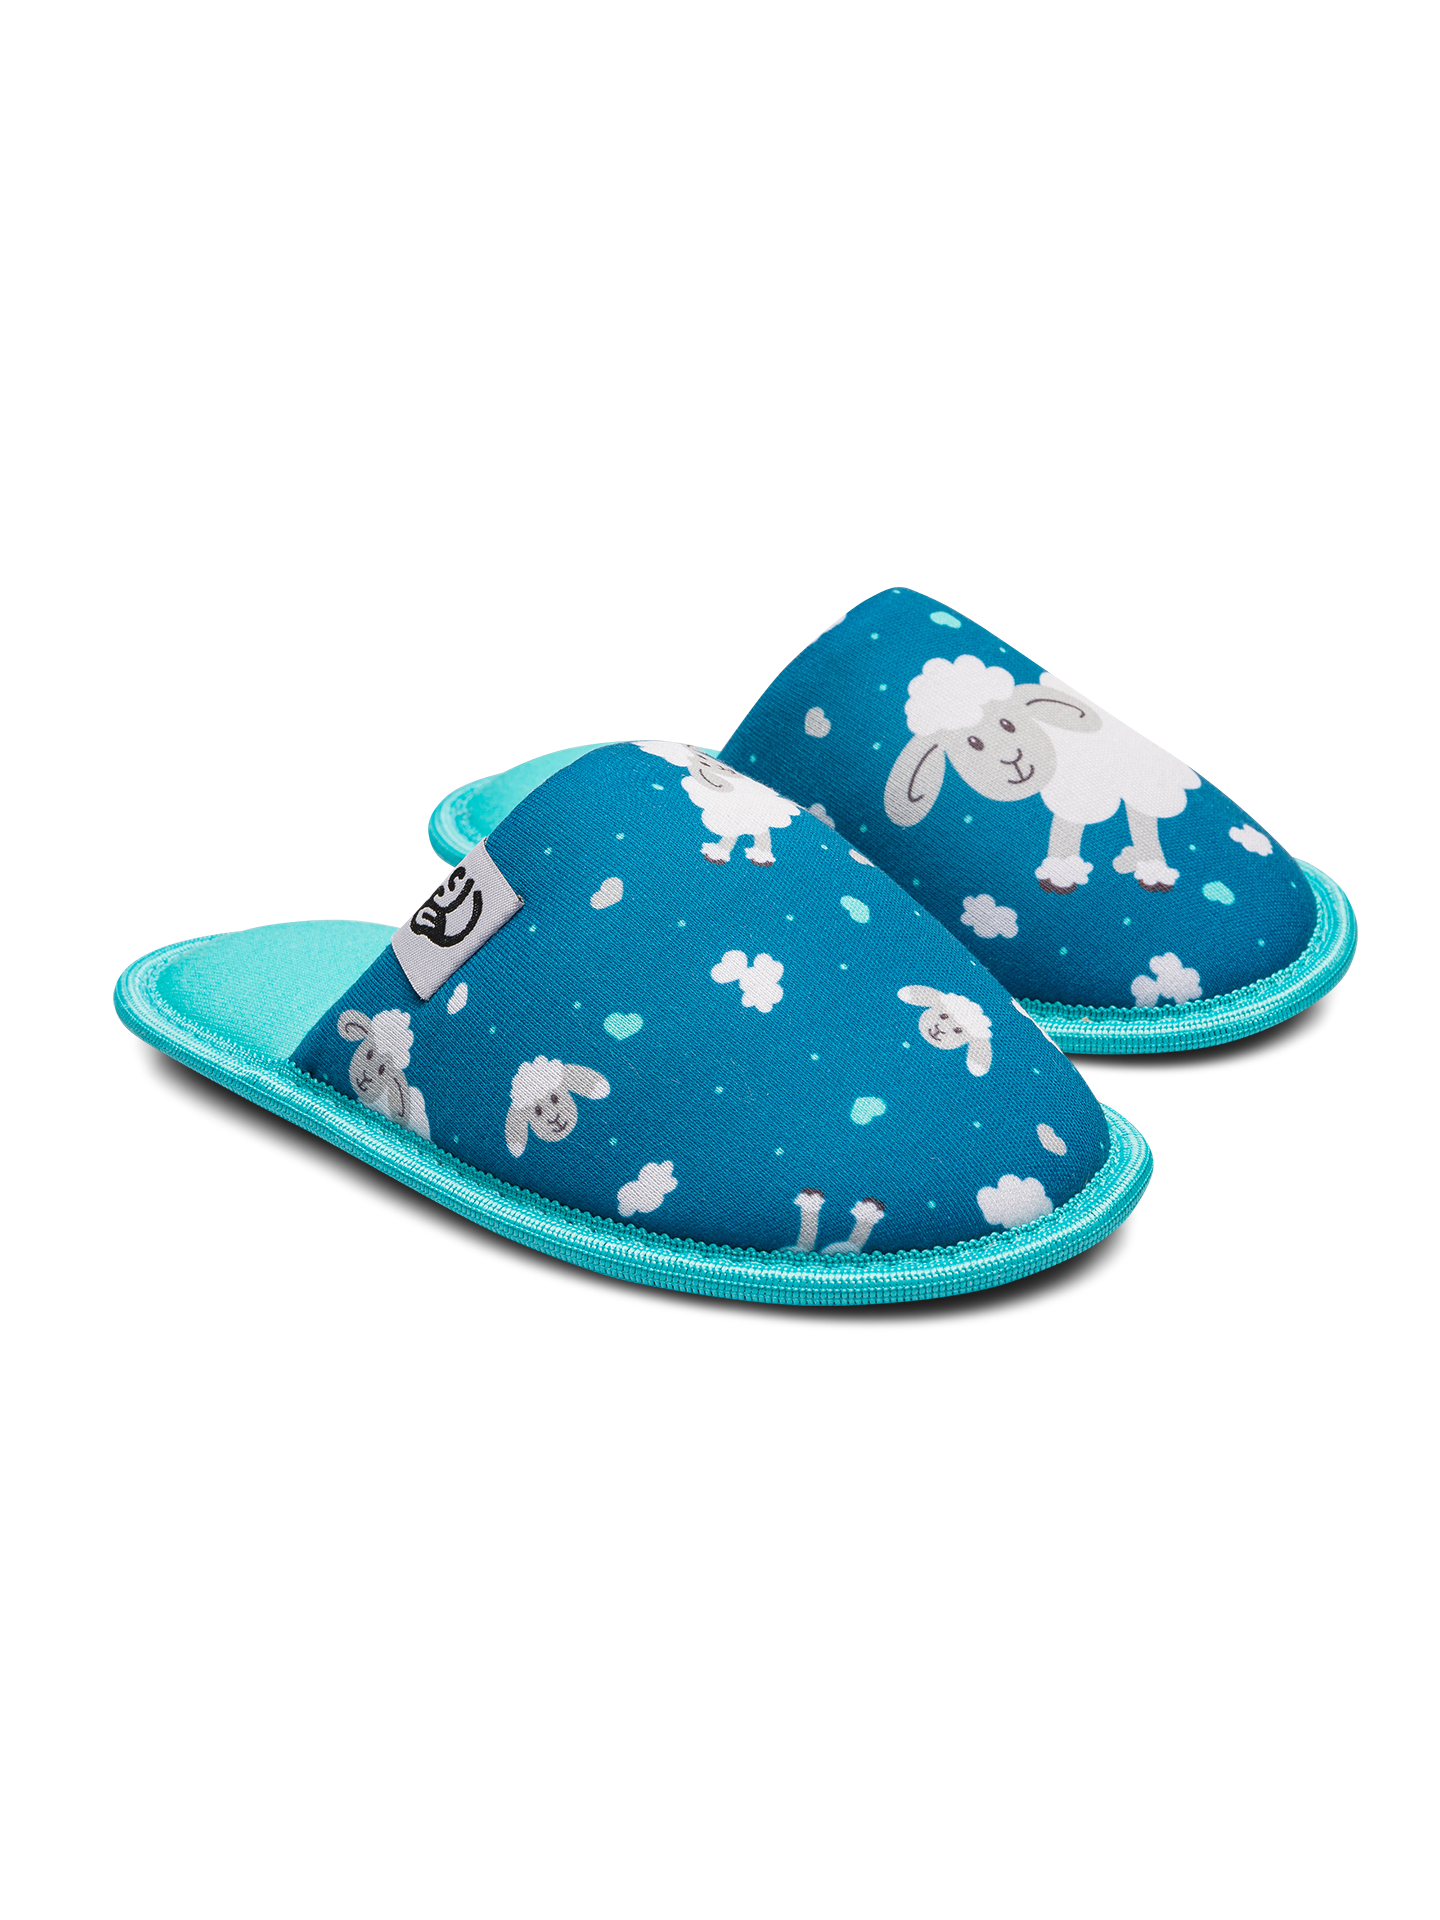 Kids' Slippers Sheep & Clouds